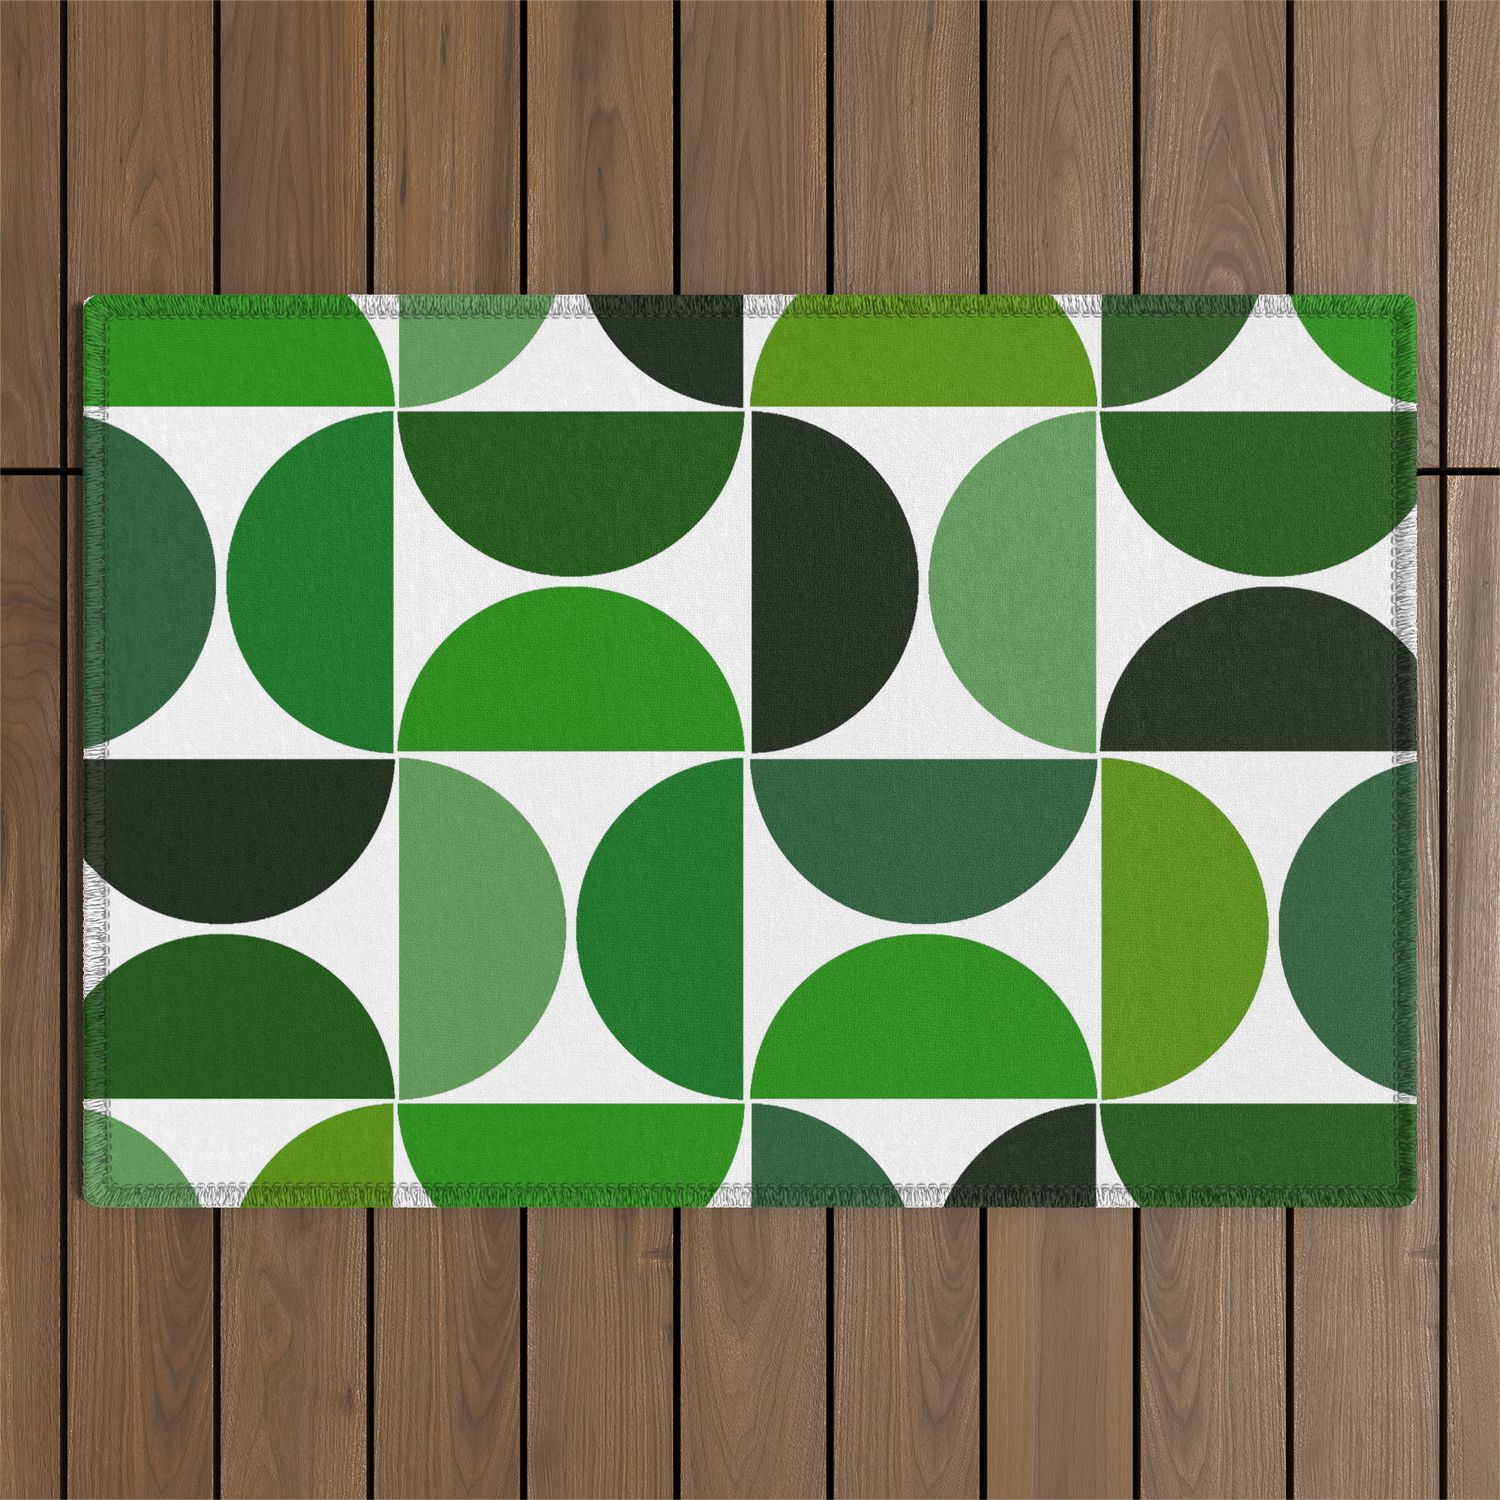 Mid Century Modern Geometric Green Outdoor Rugartstudio88design |  Society6 Throughout Green Outdoor Rugs (View 9 of 15)